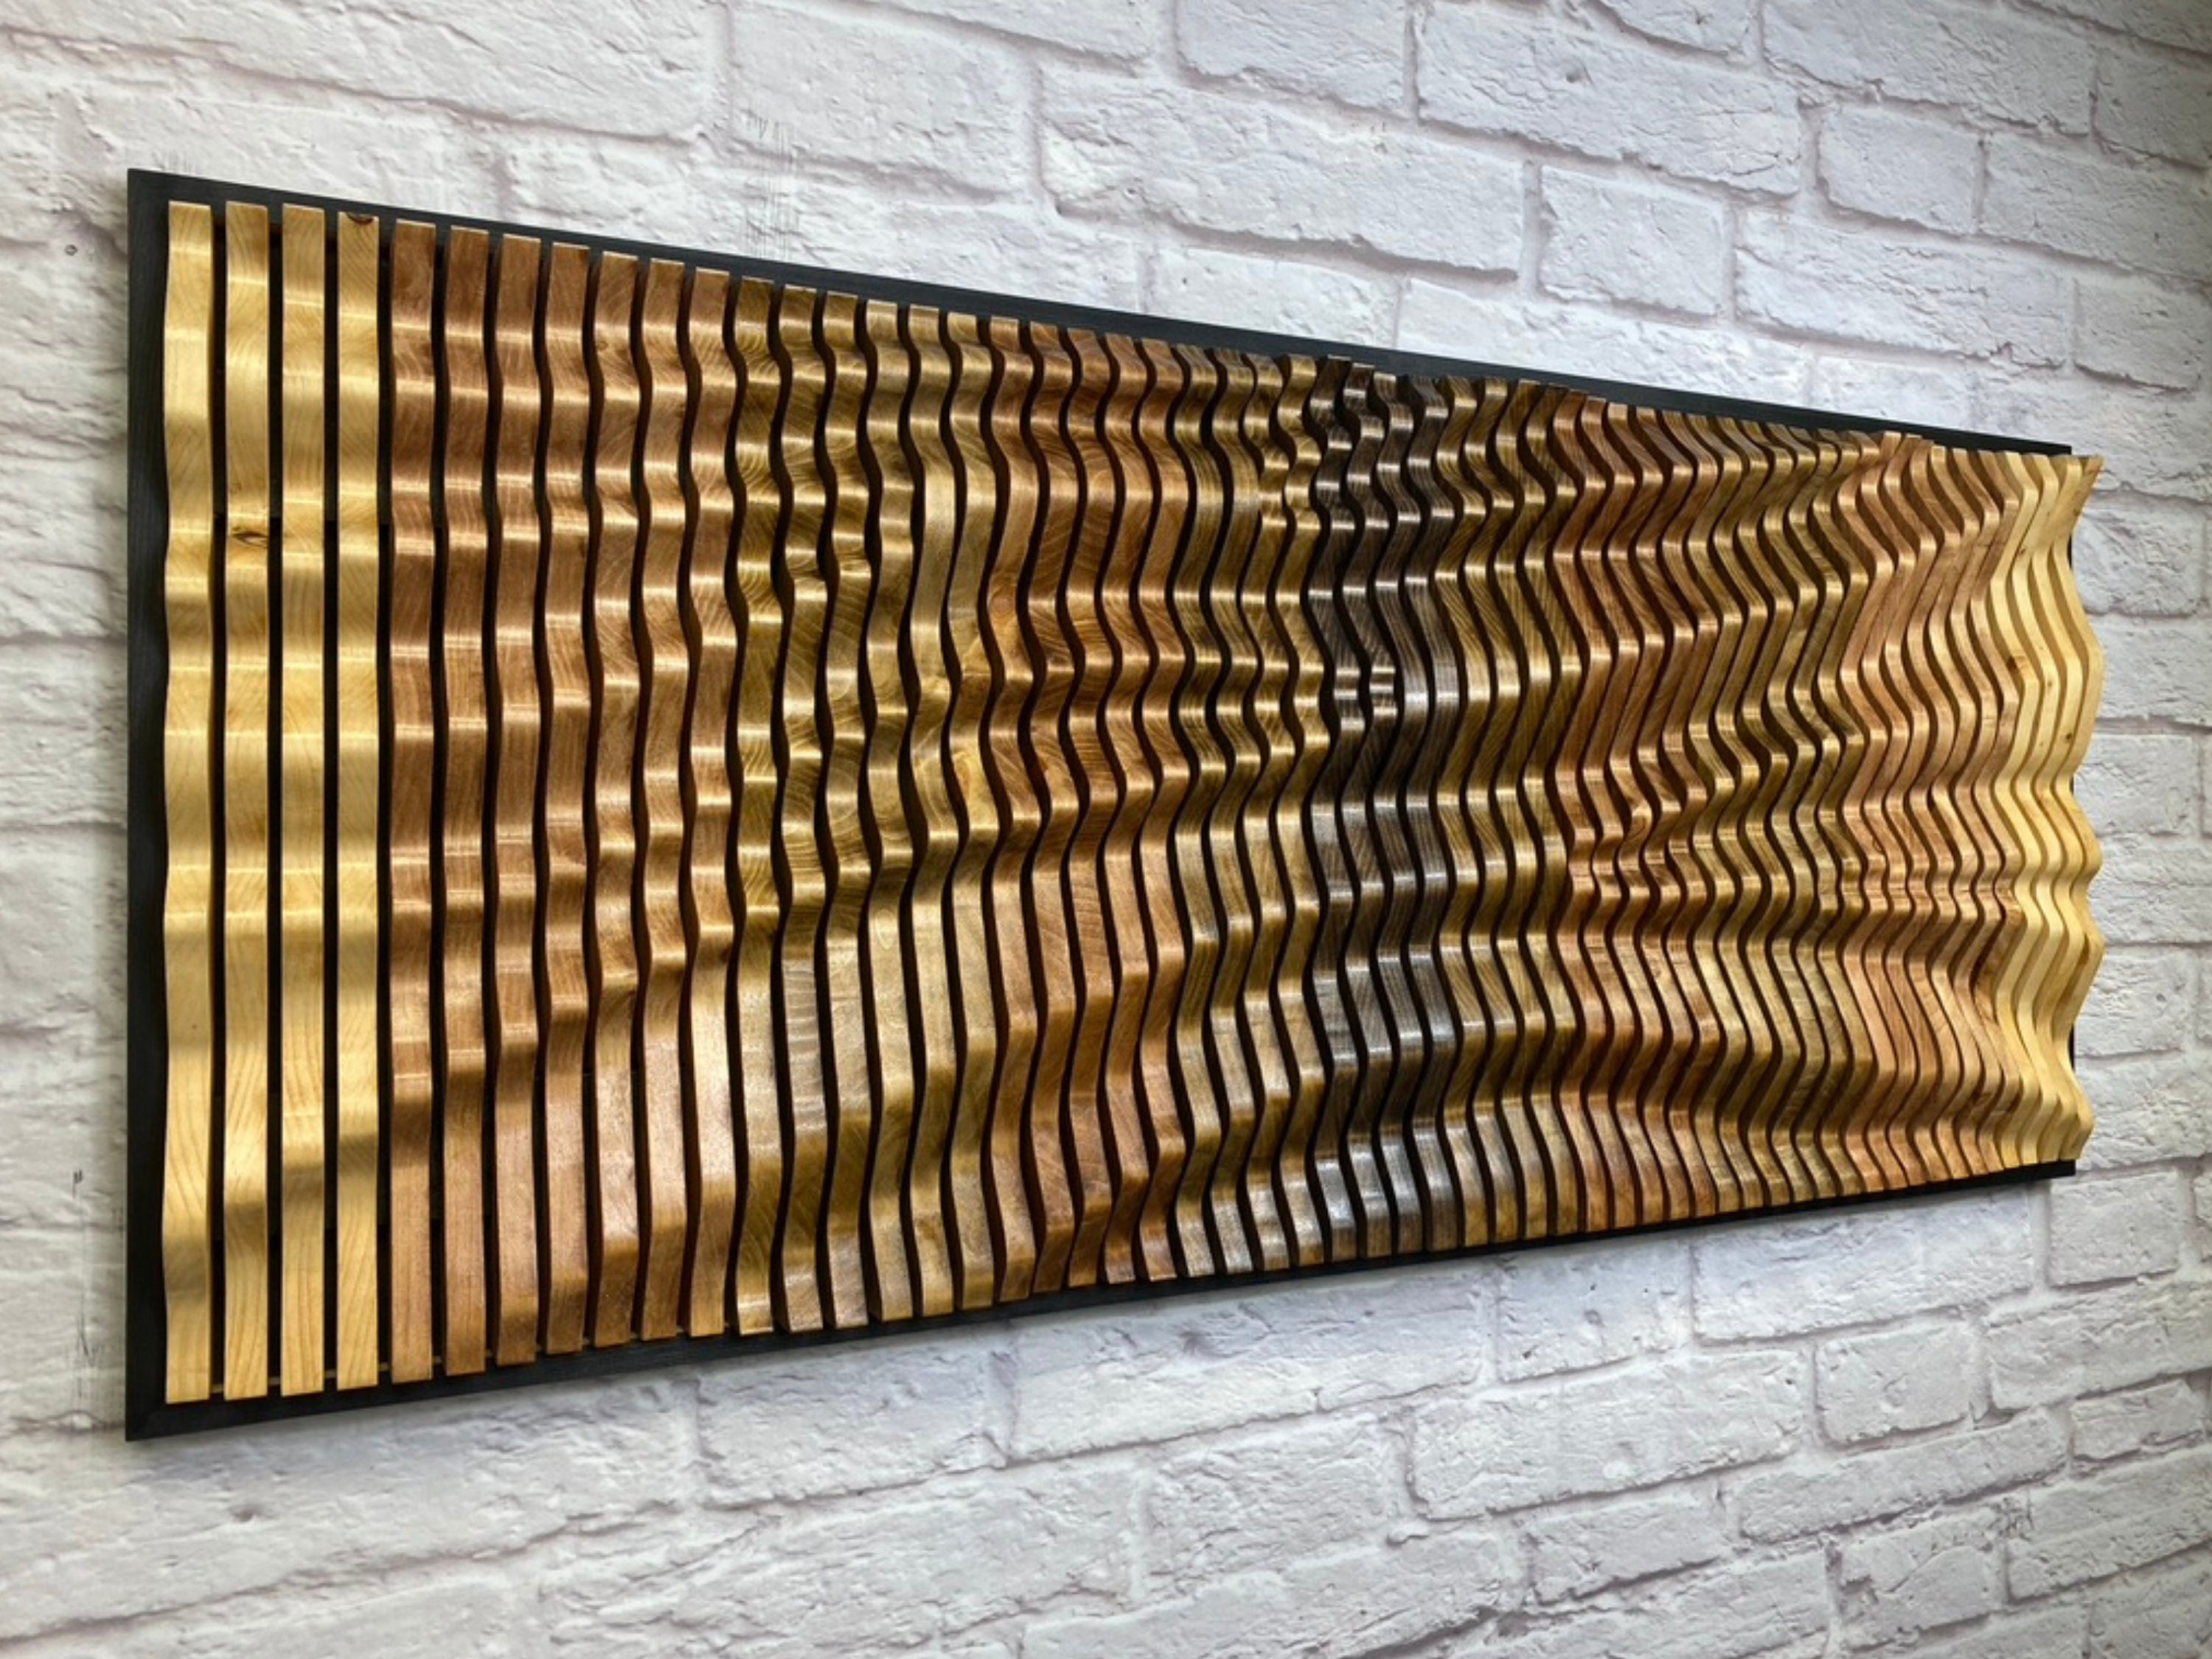 LARGE Unique Wood Wall Art, Wooden Sculpture, Parametric Wood Decor, 3D  Wood Wall Art, Parametric Wood Art, Gift Ideas, FREE SHIPPING -  Canada